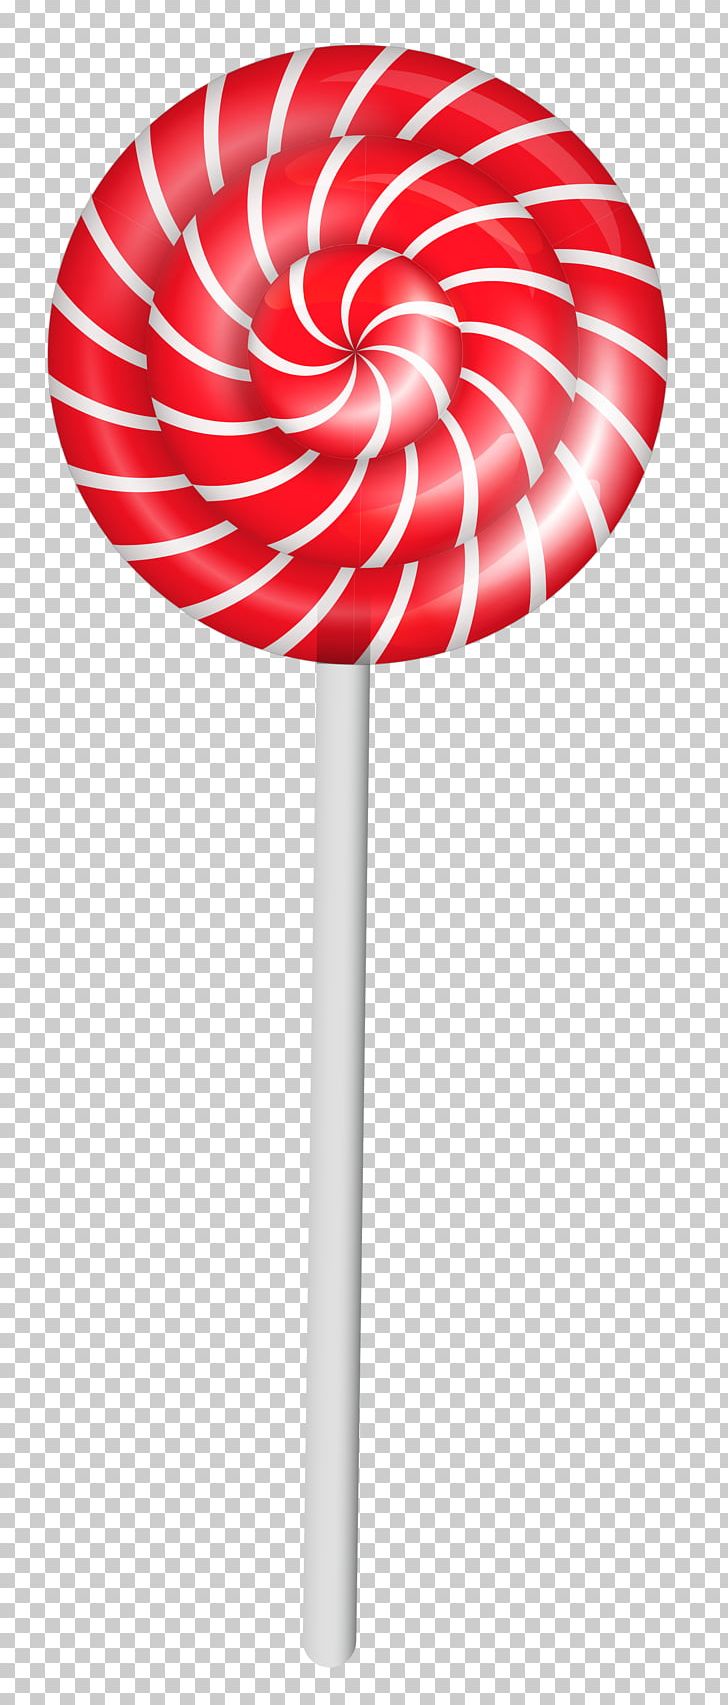 Android Lollipop Icon PNG, Clipart, Android Lollipop, Candy, Candy Cane, Caramel, Chocolate Free PNG Download